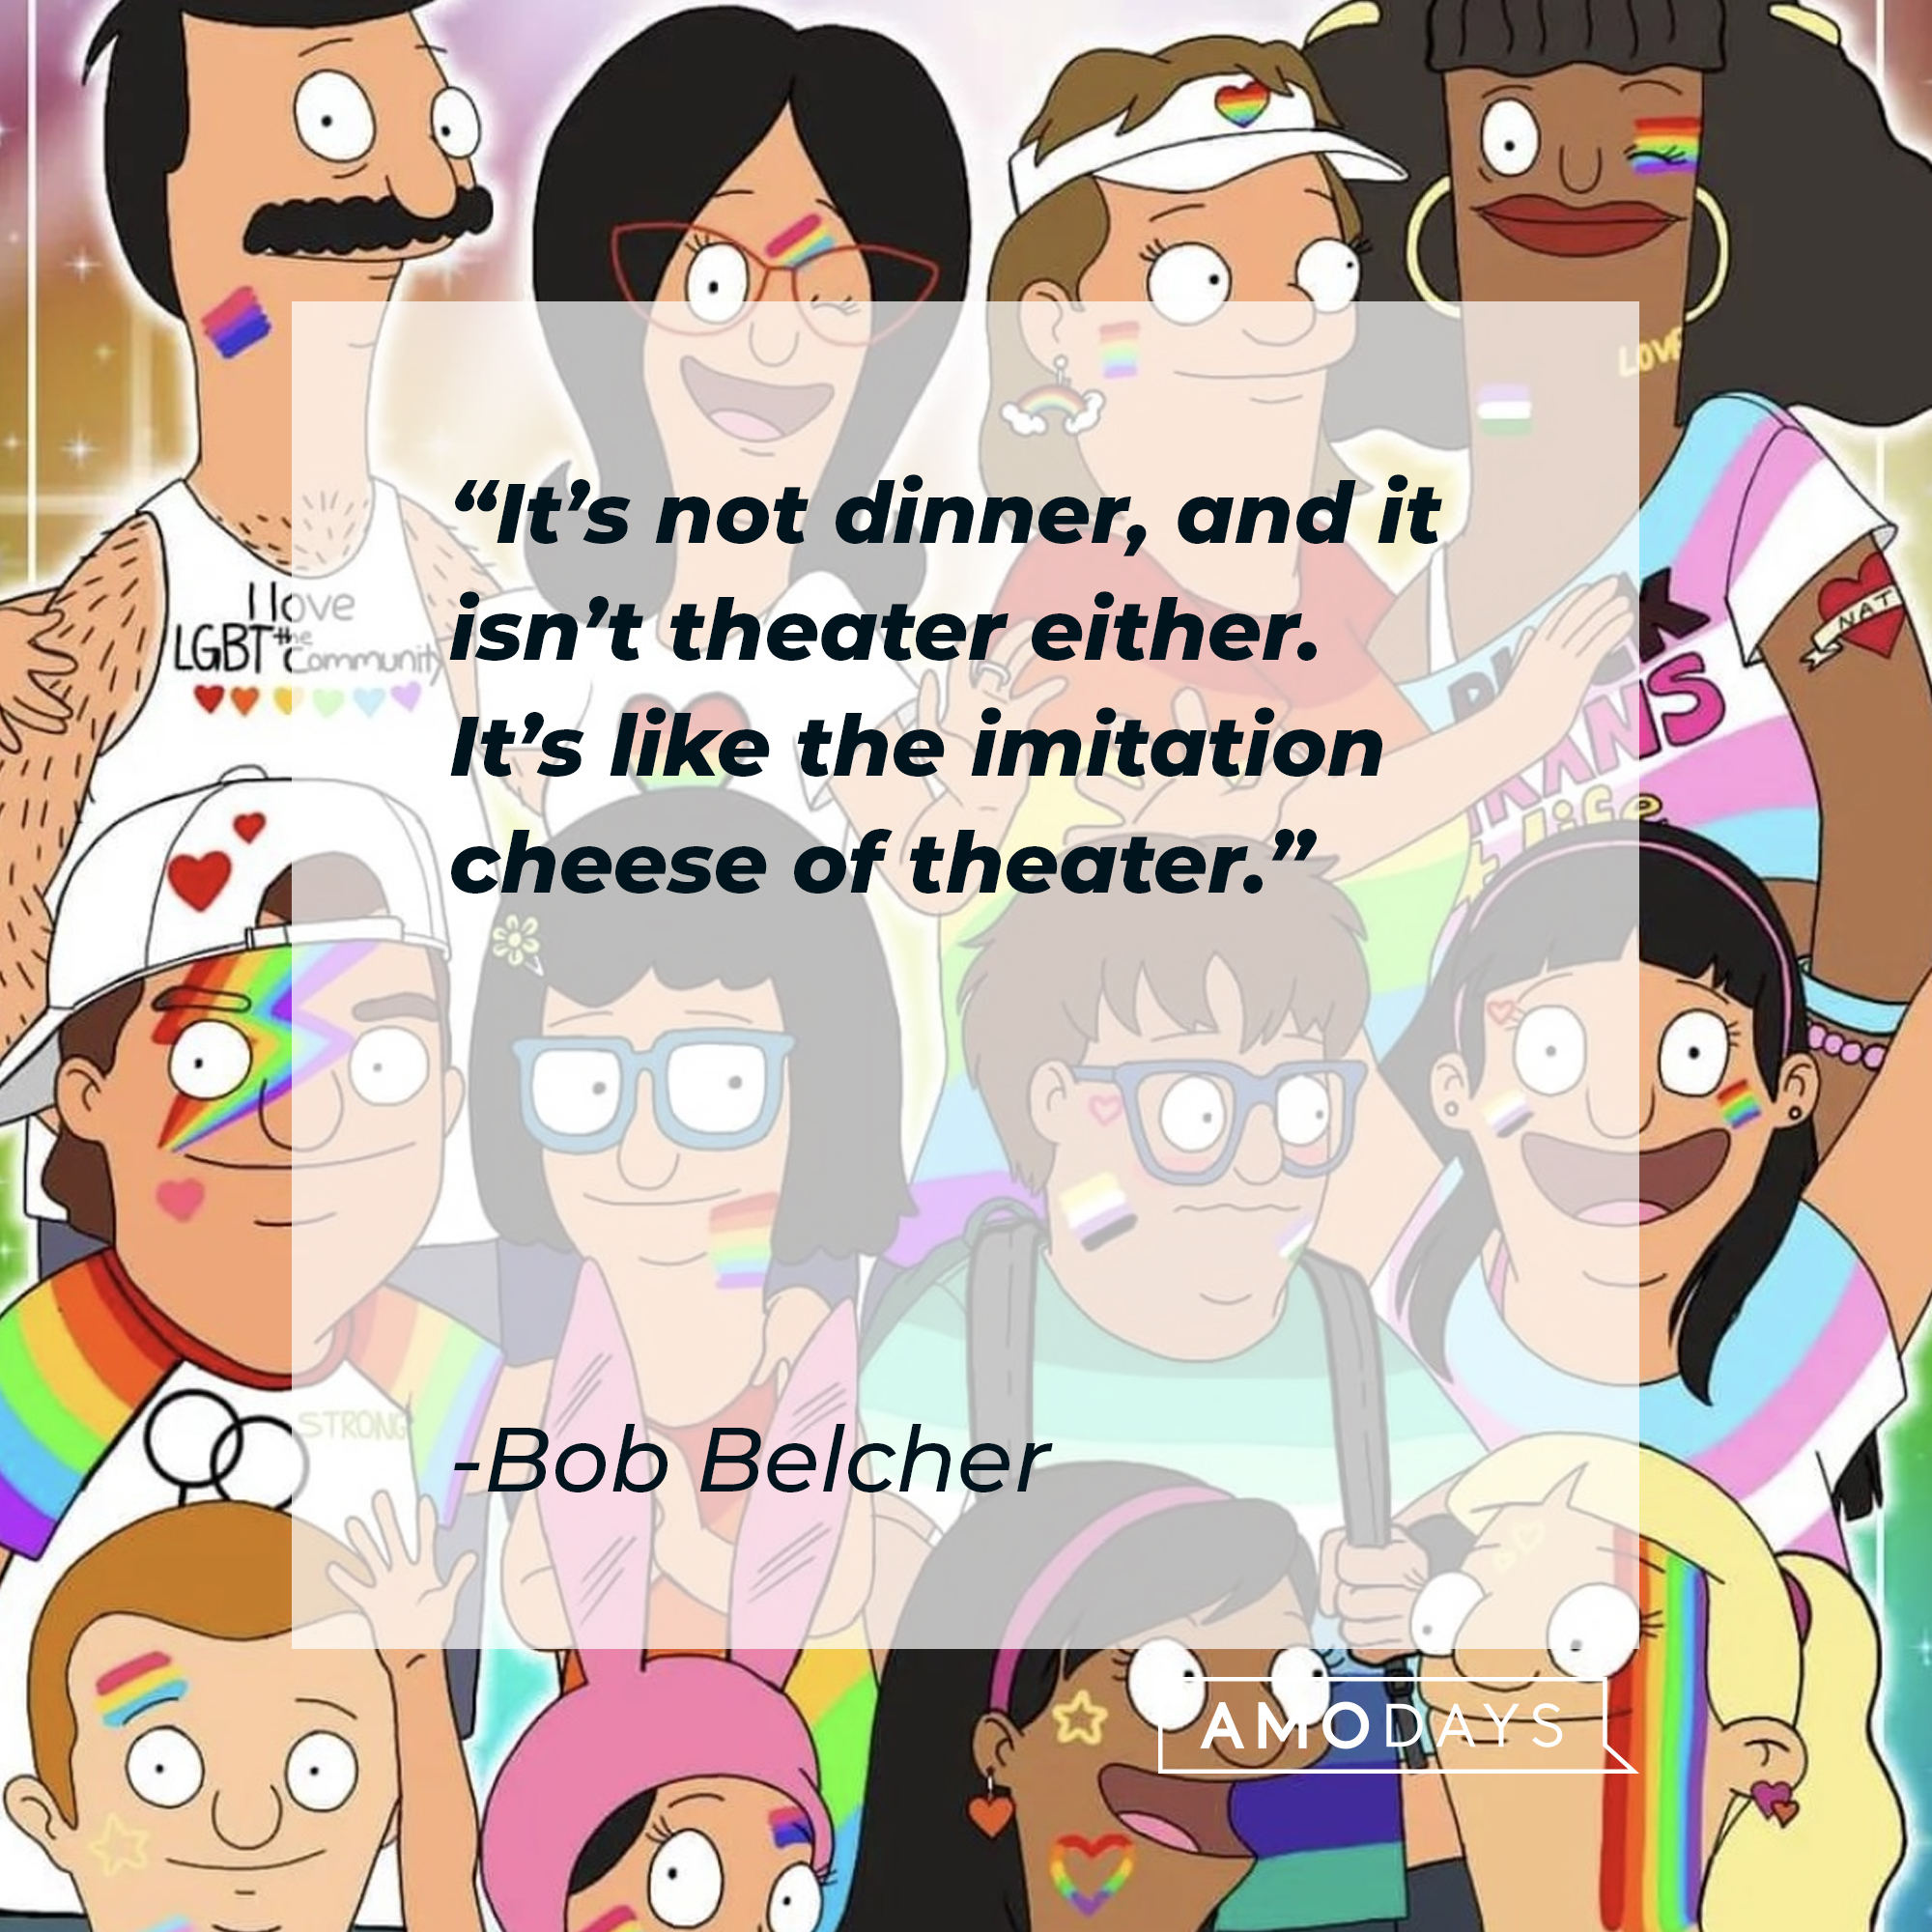 Bob Belcher's quote: “It’s not dinner, and it isn’t theater either. It’s like the imitation cheese of theater.” | Source: facebook.com/BobsBurgers